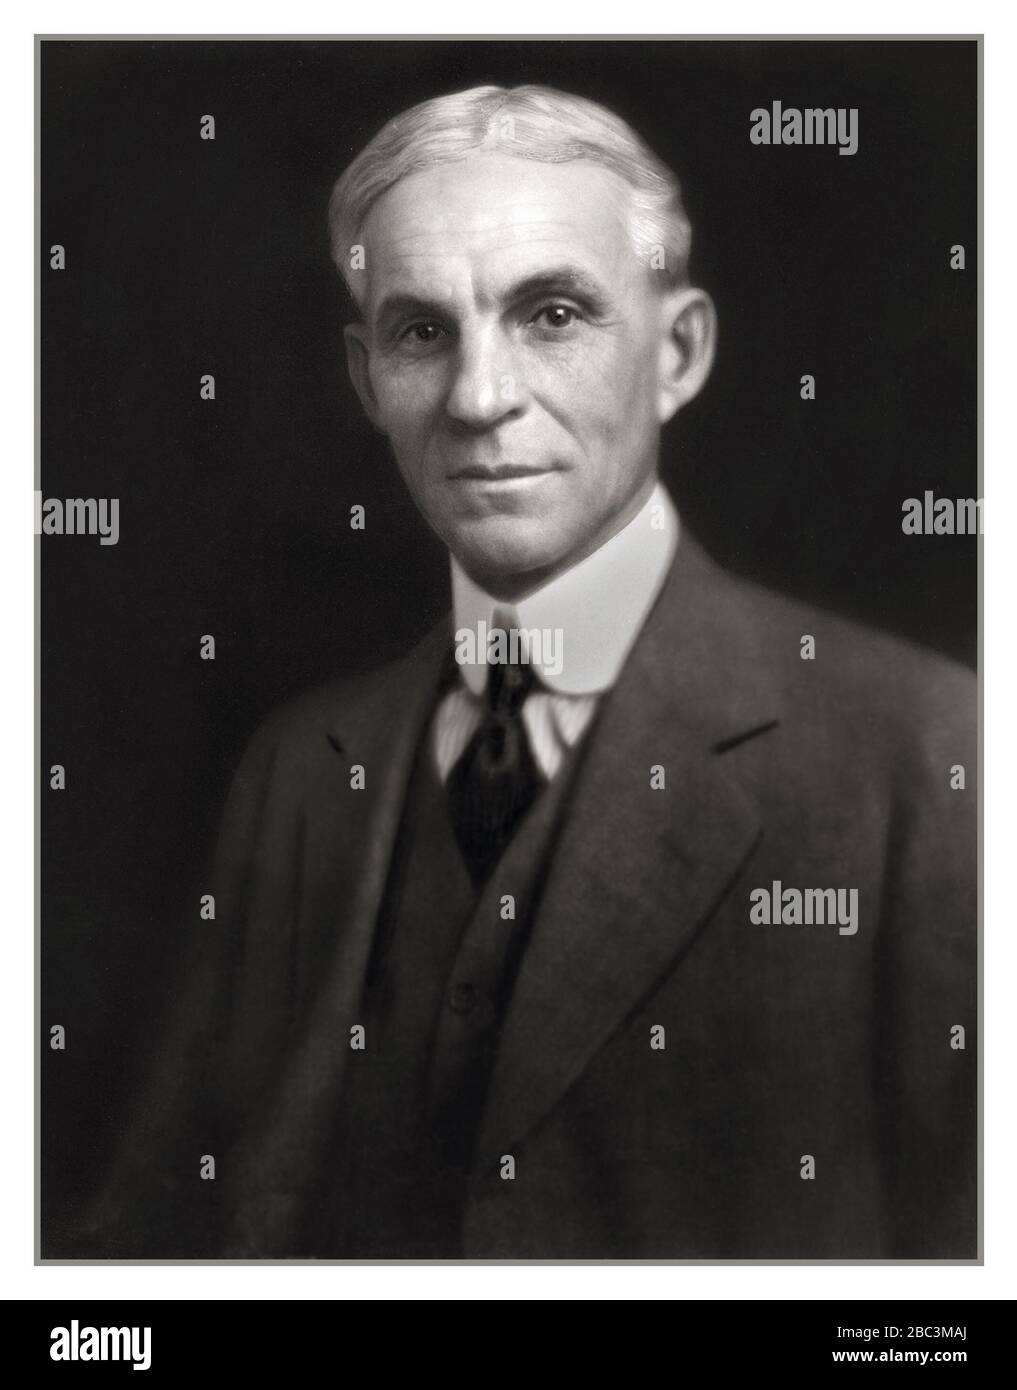 Henry Ford,1900's formal elegant studio portrait, founder, industrialist  benefactor and visionary of the American Ford Motor Company Inc.  Henry Ford Portrait Low Key Black Background USA America Stock Photo